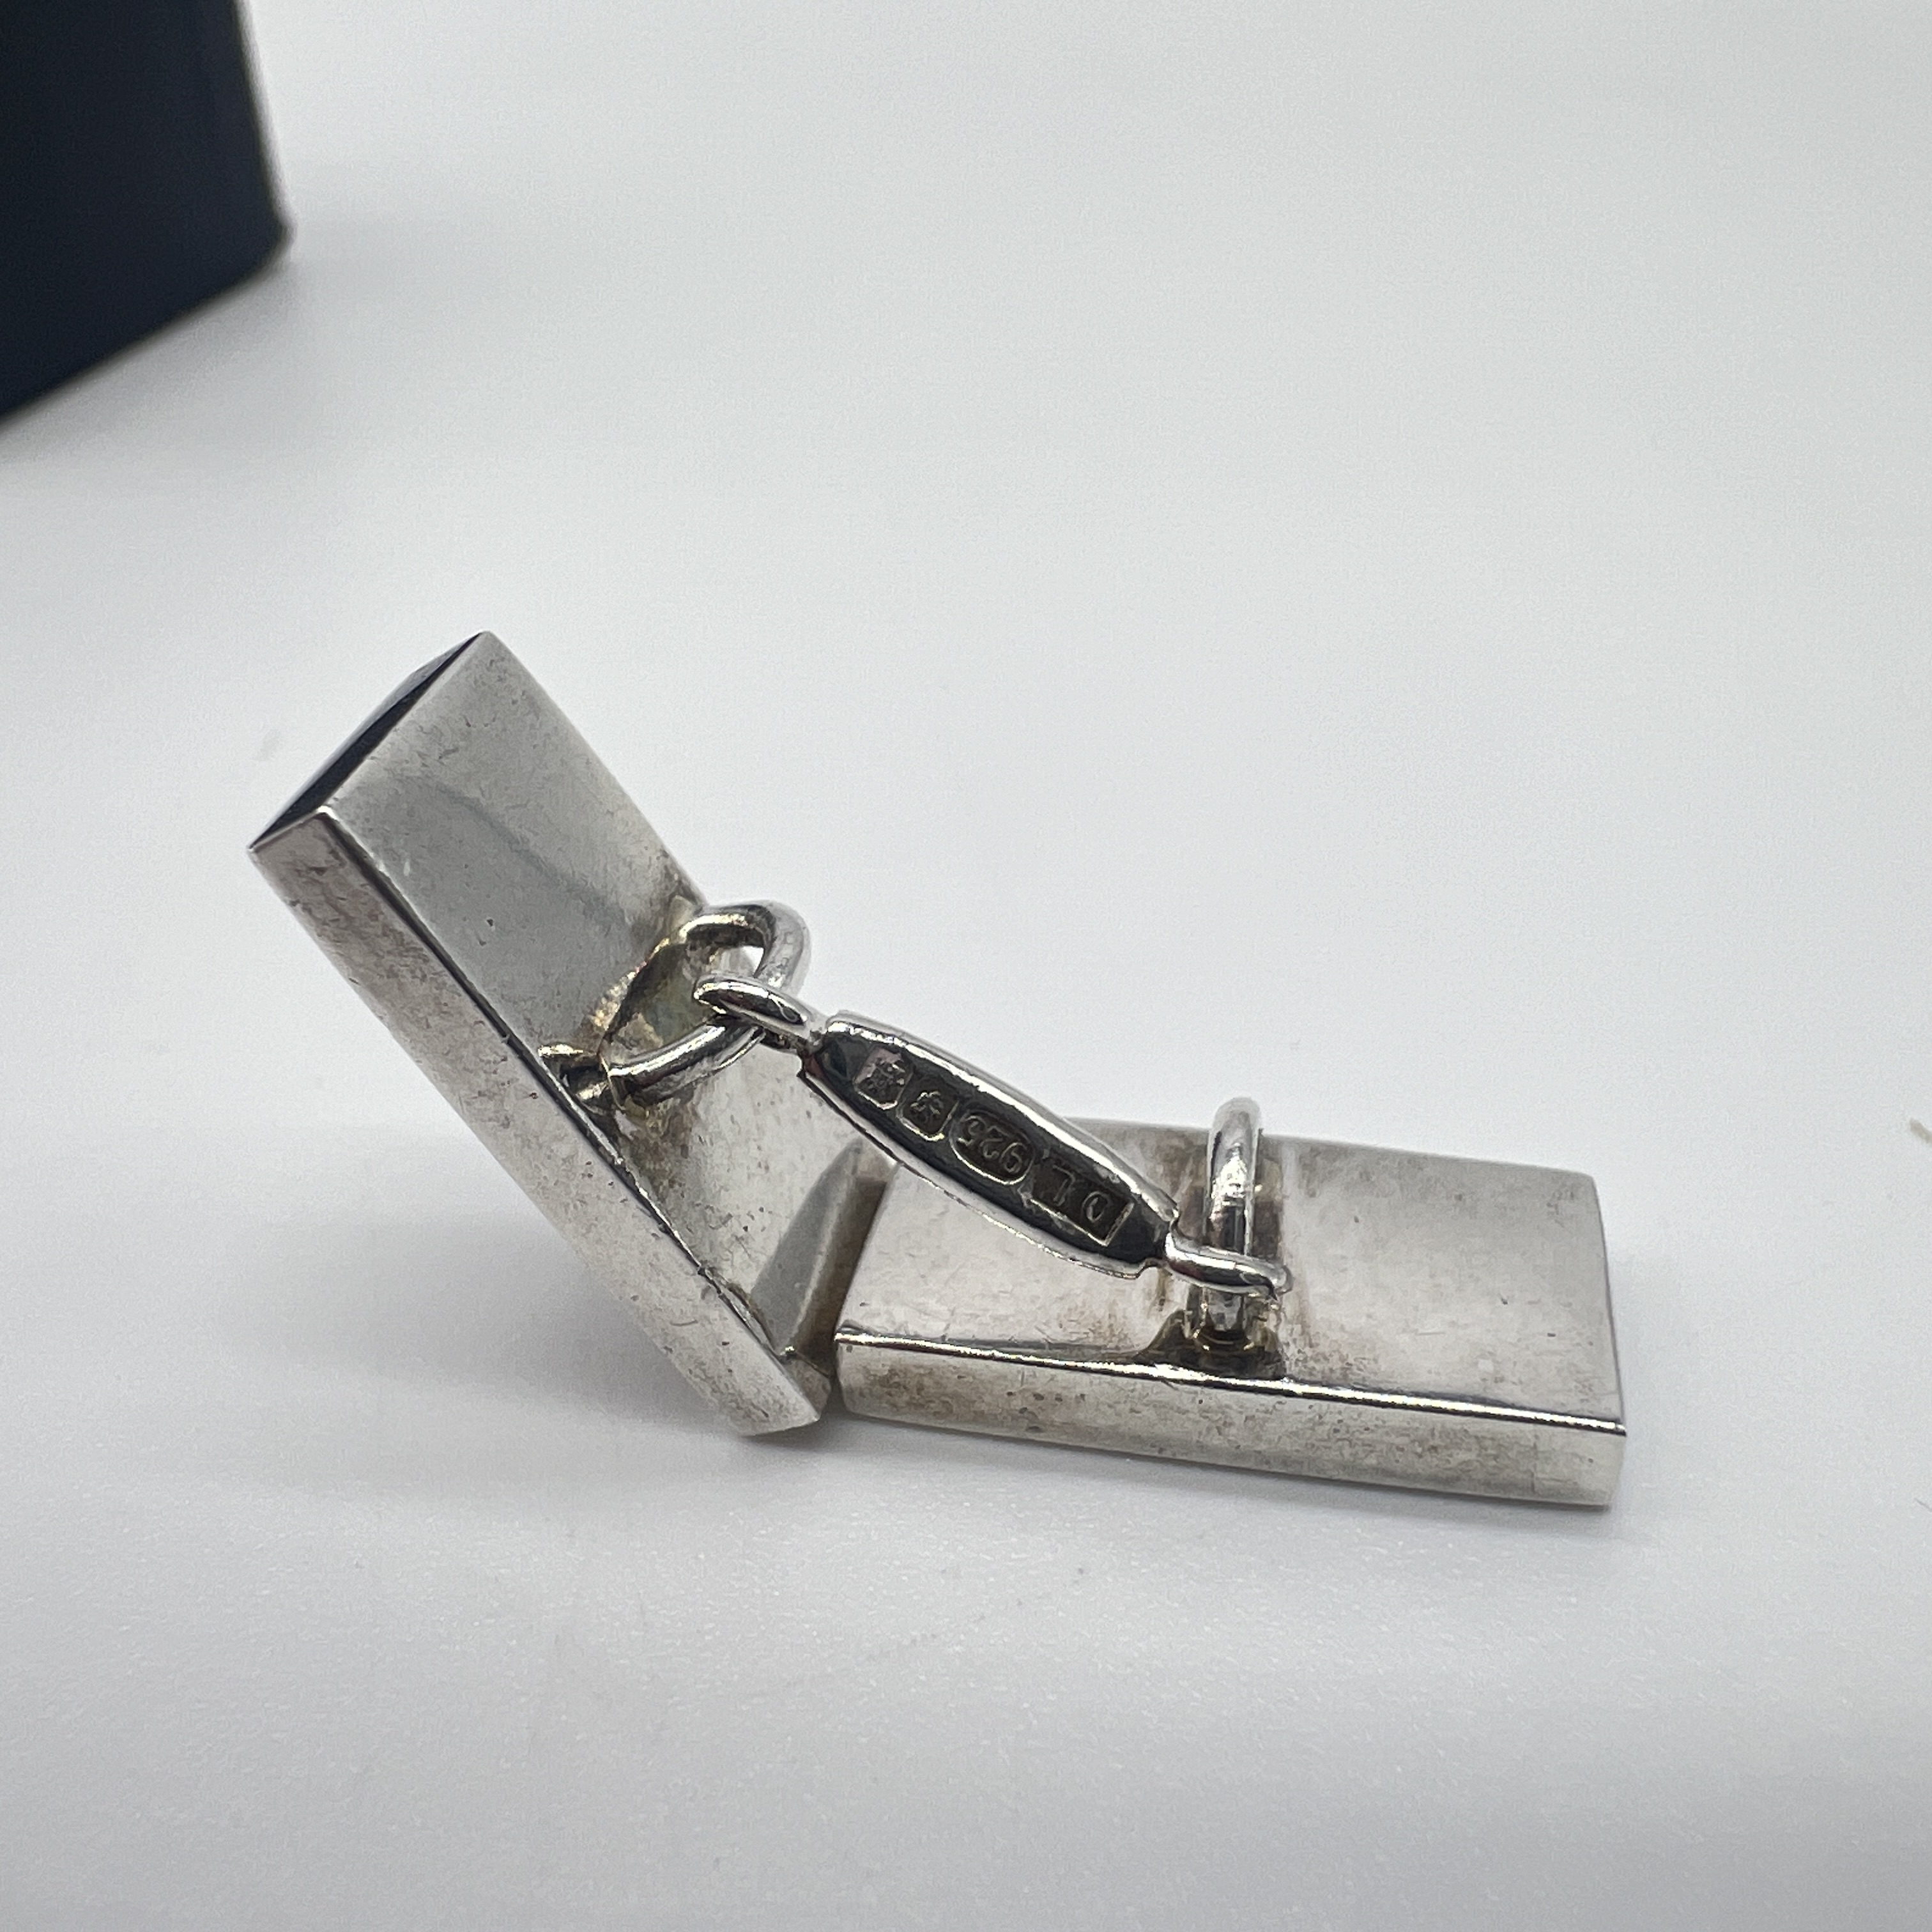 A pair of silver cufflinks - Image 3 of 4